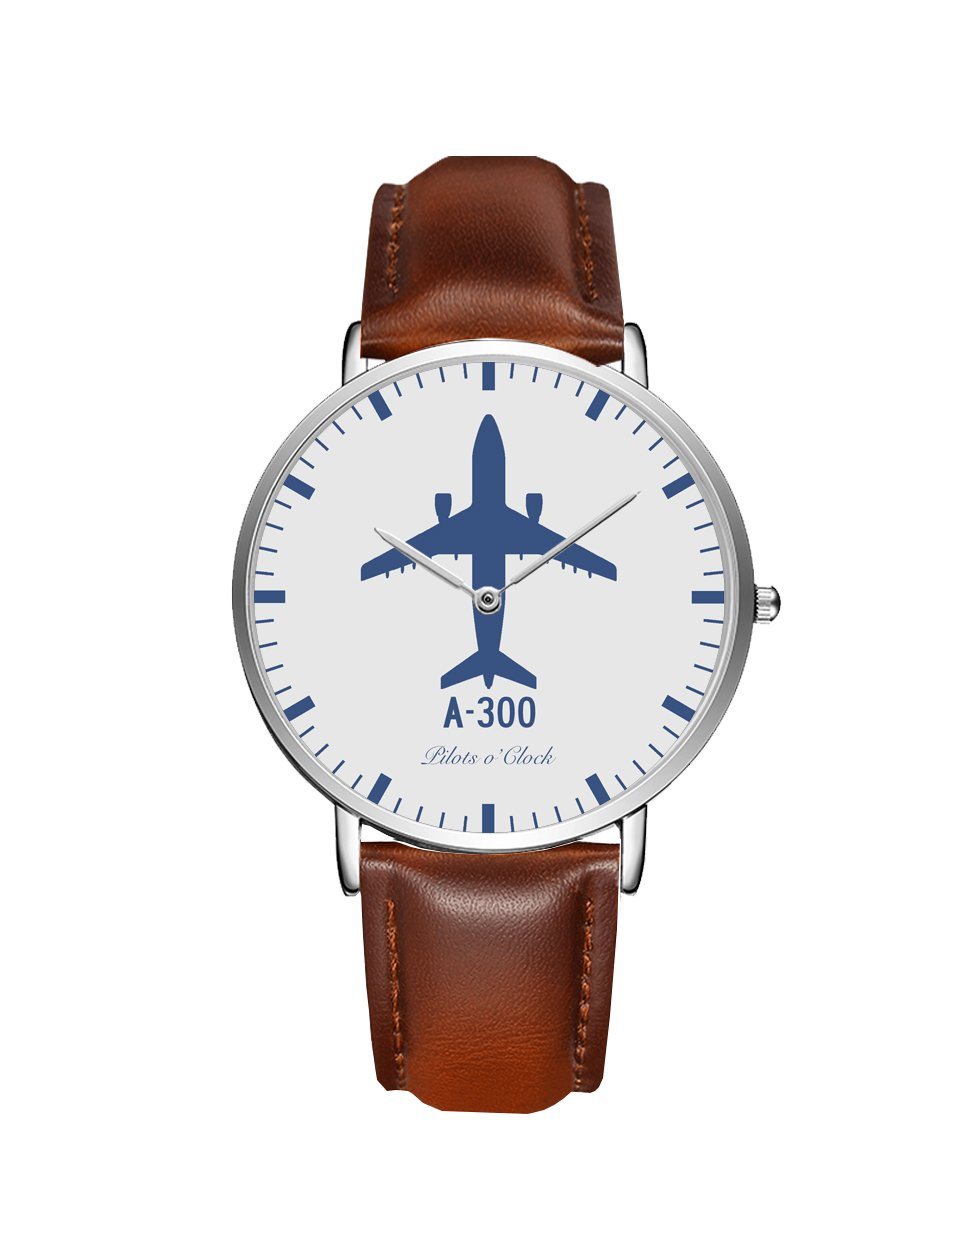 Airbus A300 Leather Strap Watches Pilot Eyes Store Silver & Brown Leather Strap 